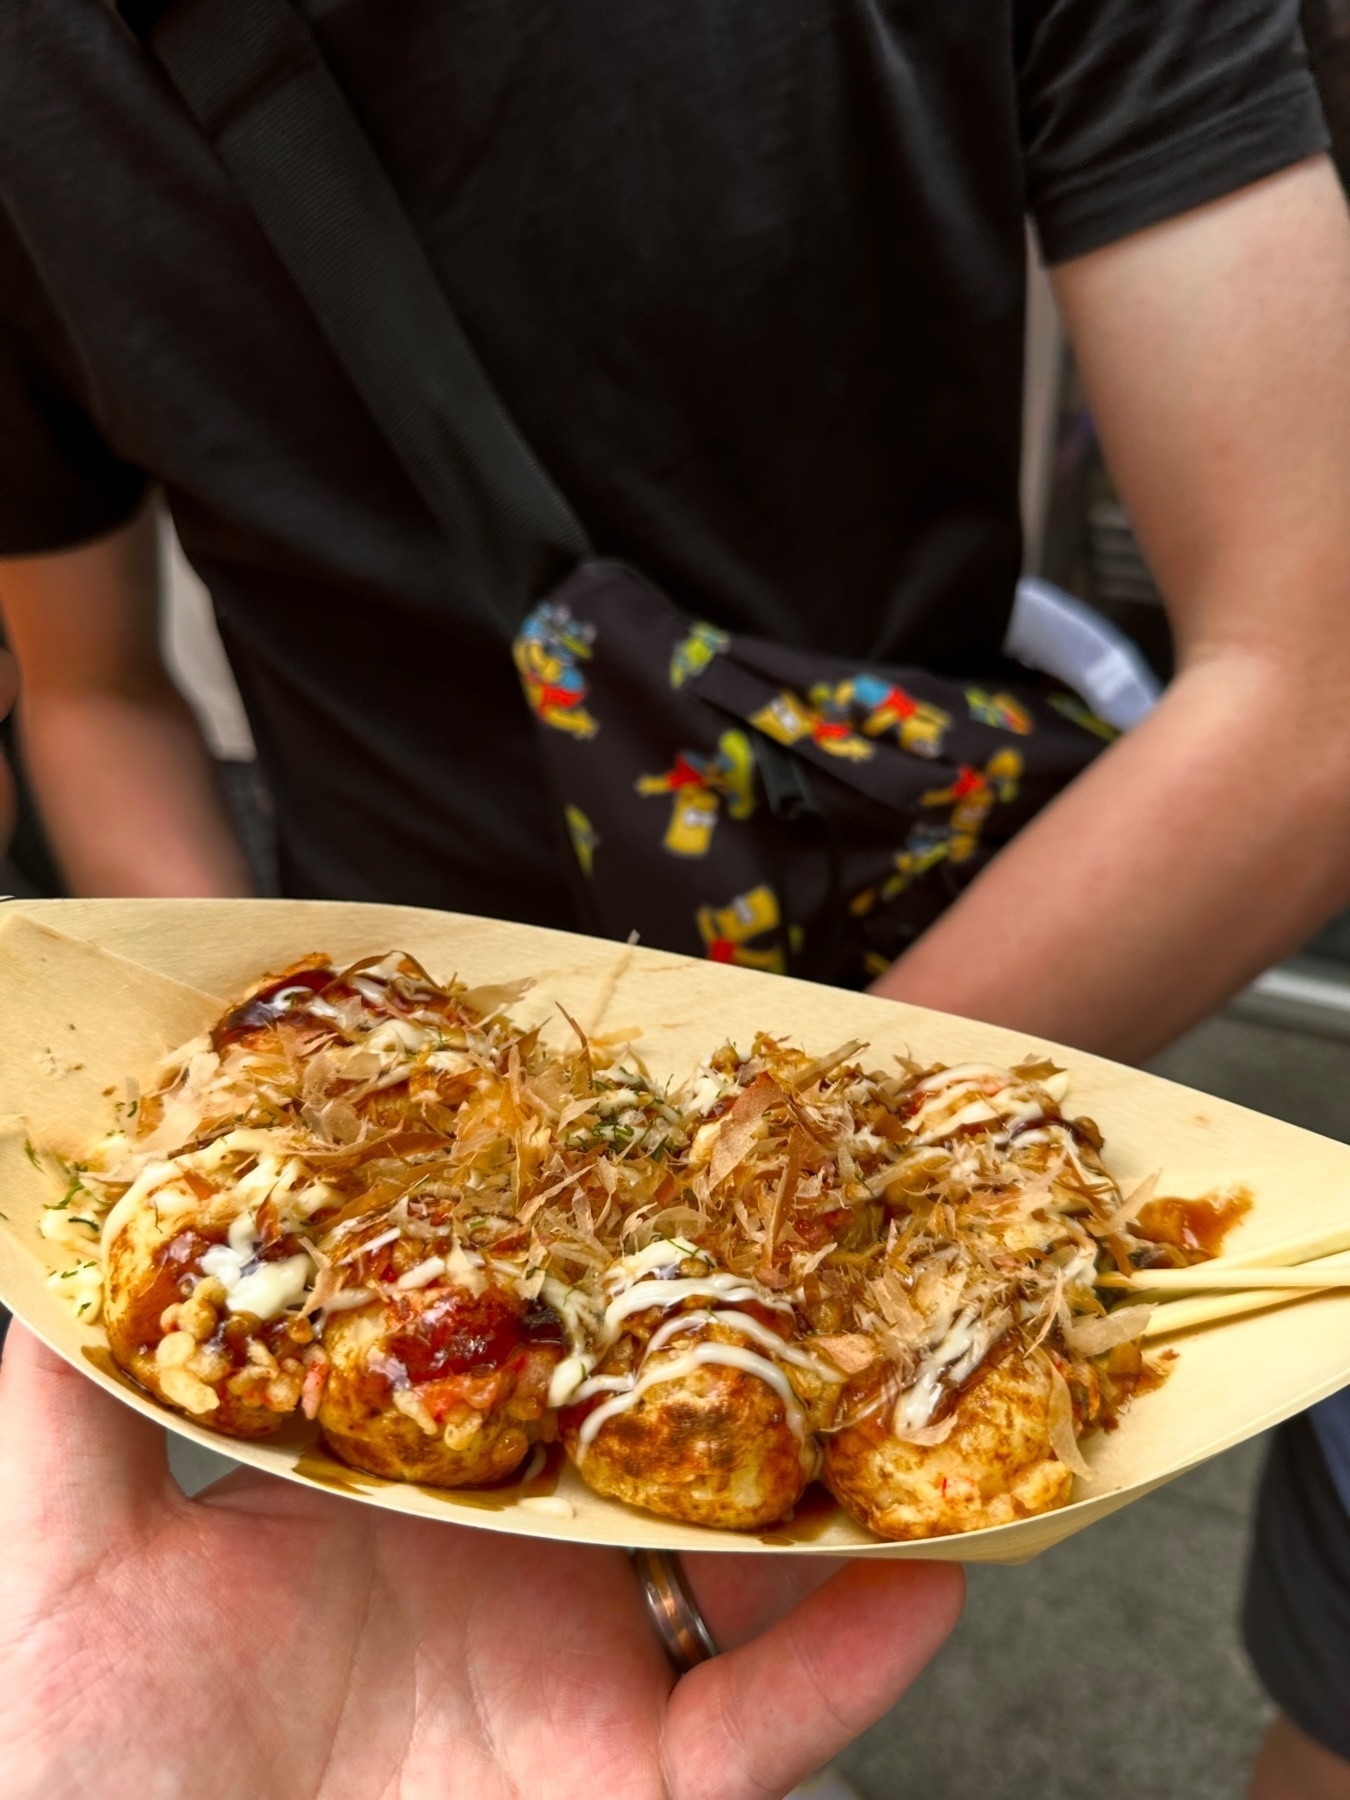 A plate of takoyaki, which are Japanese octopus dumplings, topped with mayonnaise, a savory sauce, and bonito flakes, held by a person with chopsticks.